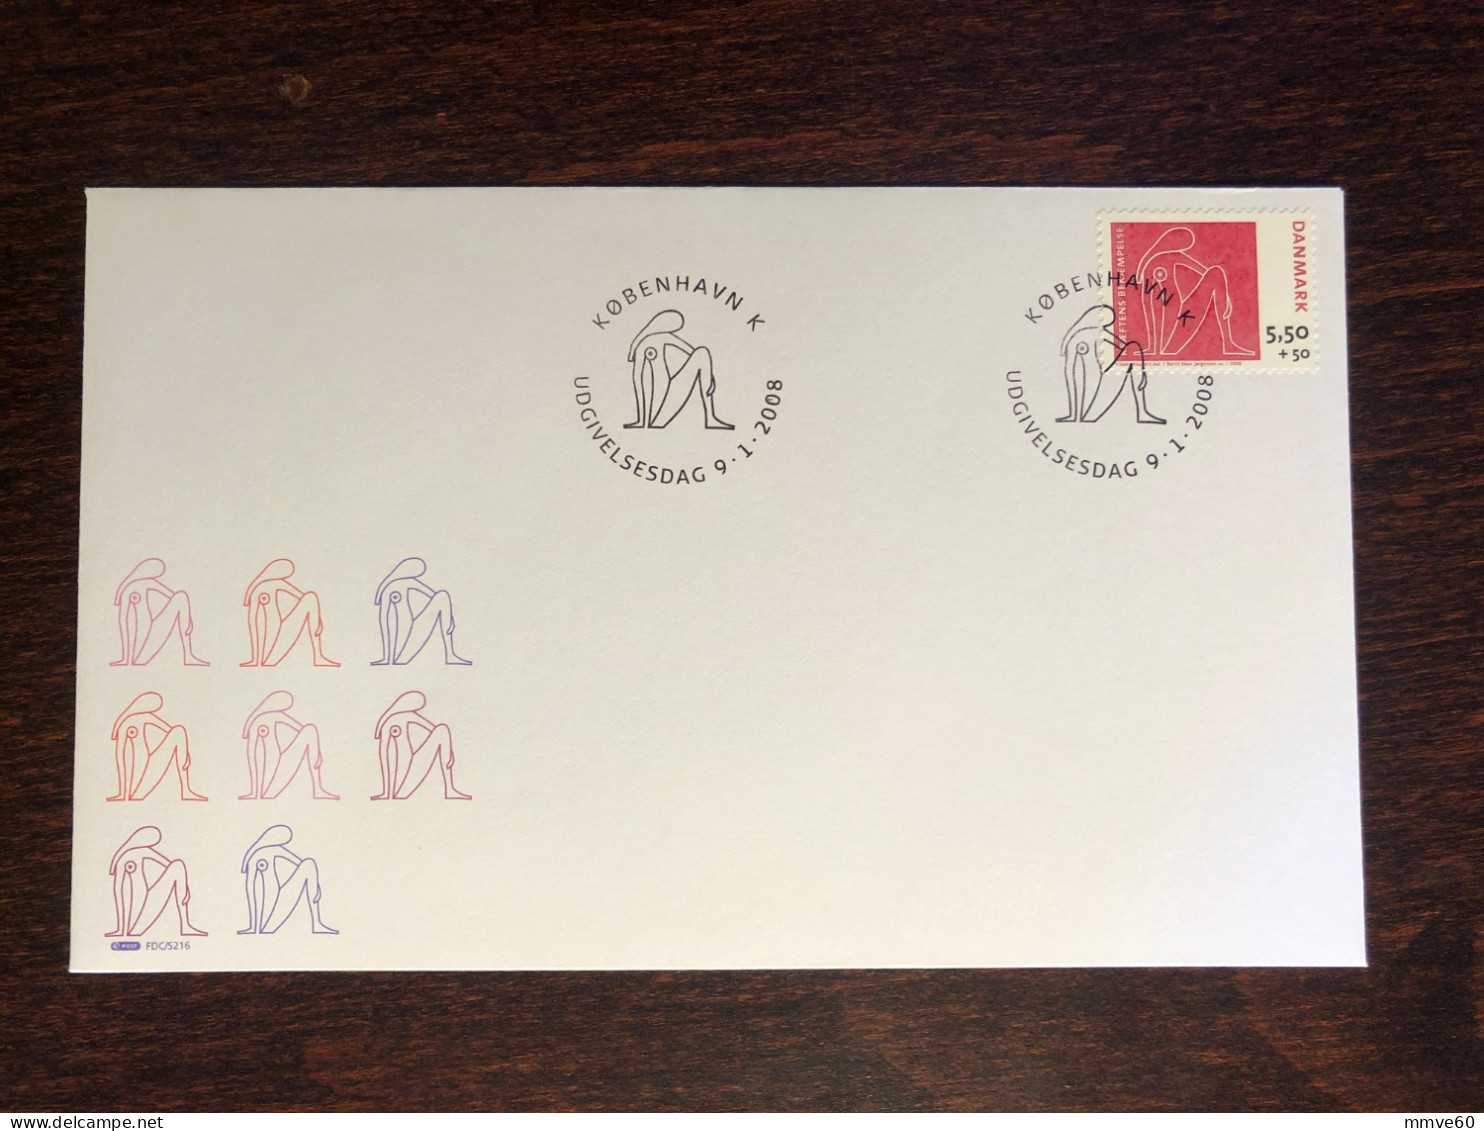 DENMARK FDC COVER 2008 YEAR CANCER ONCOLOGY HEALTH MEDICINE STAMPS - FDC